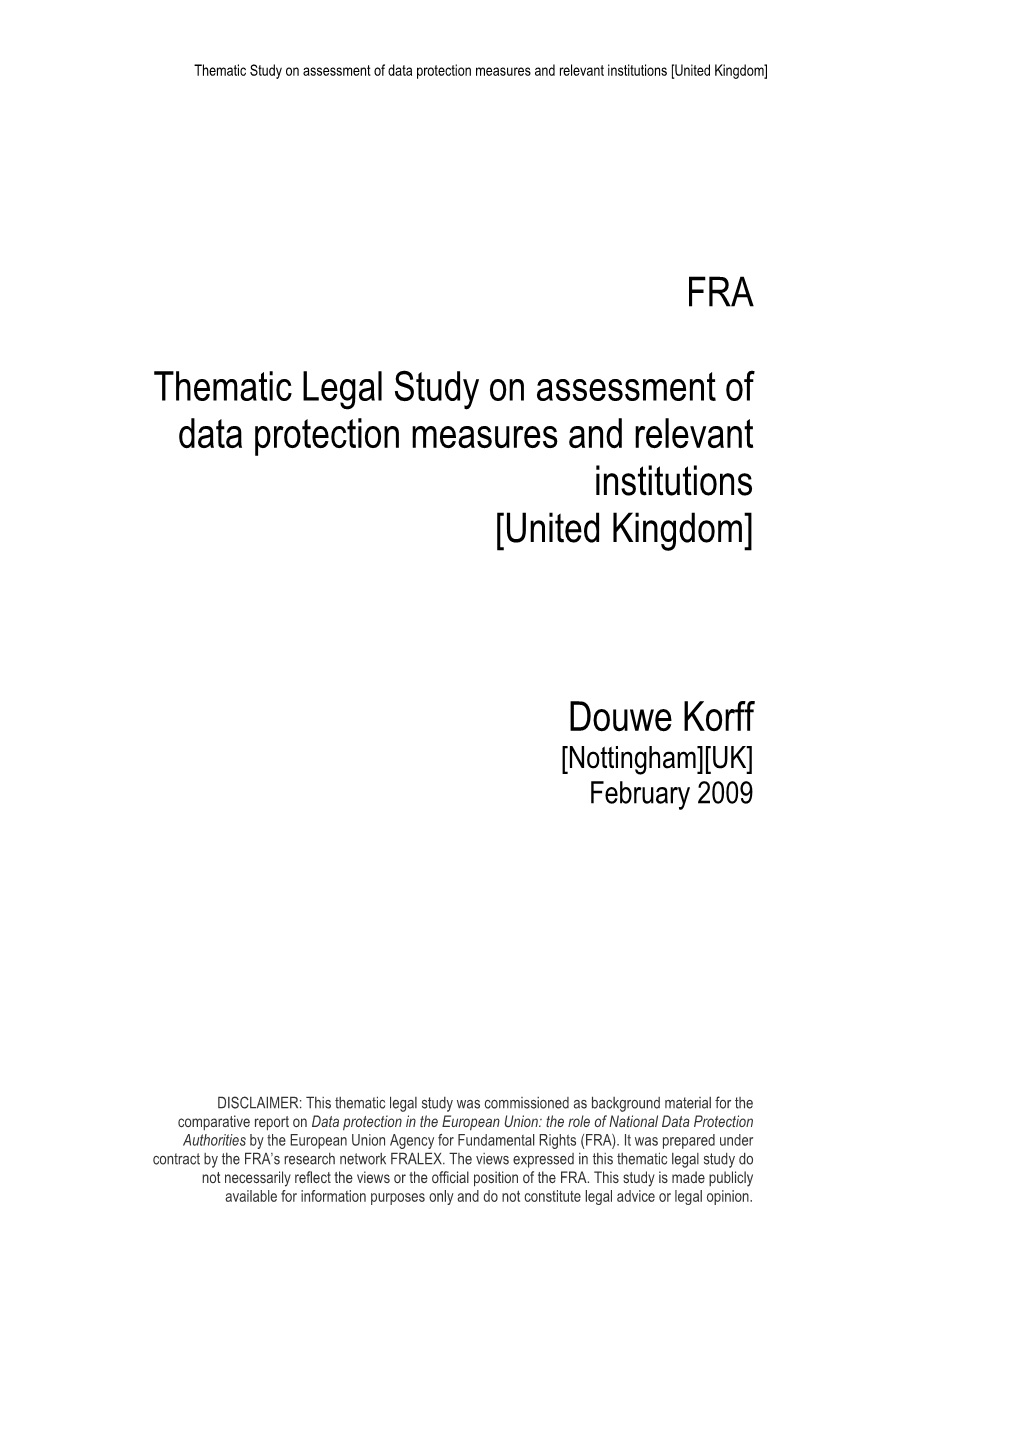 FRA Thematic Legal Study on Assessment of Data Protection Measures and Relevant Institutions